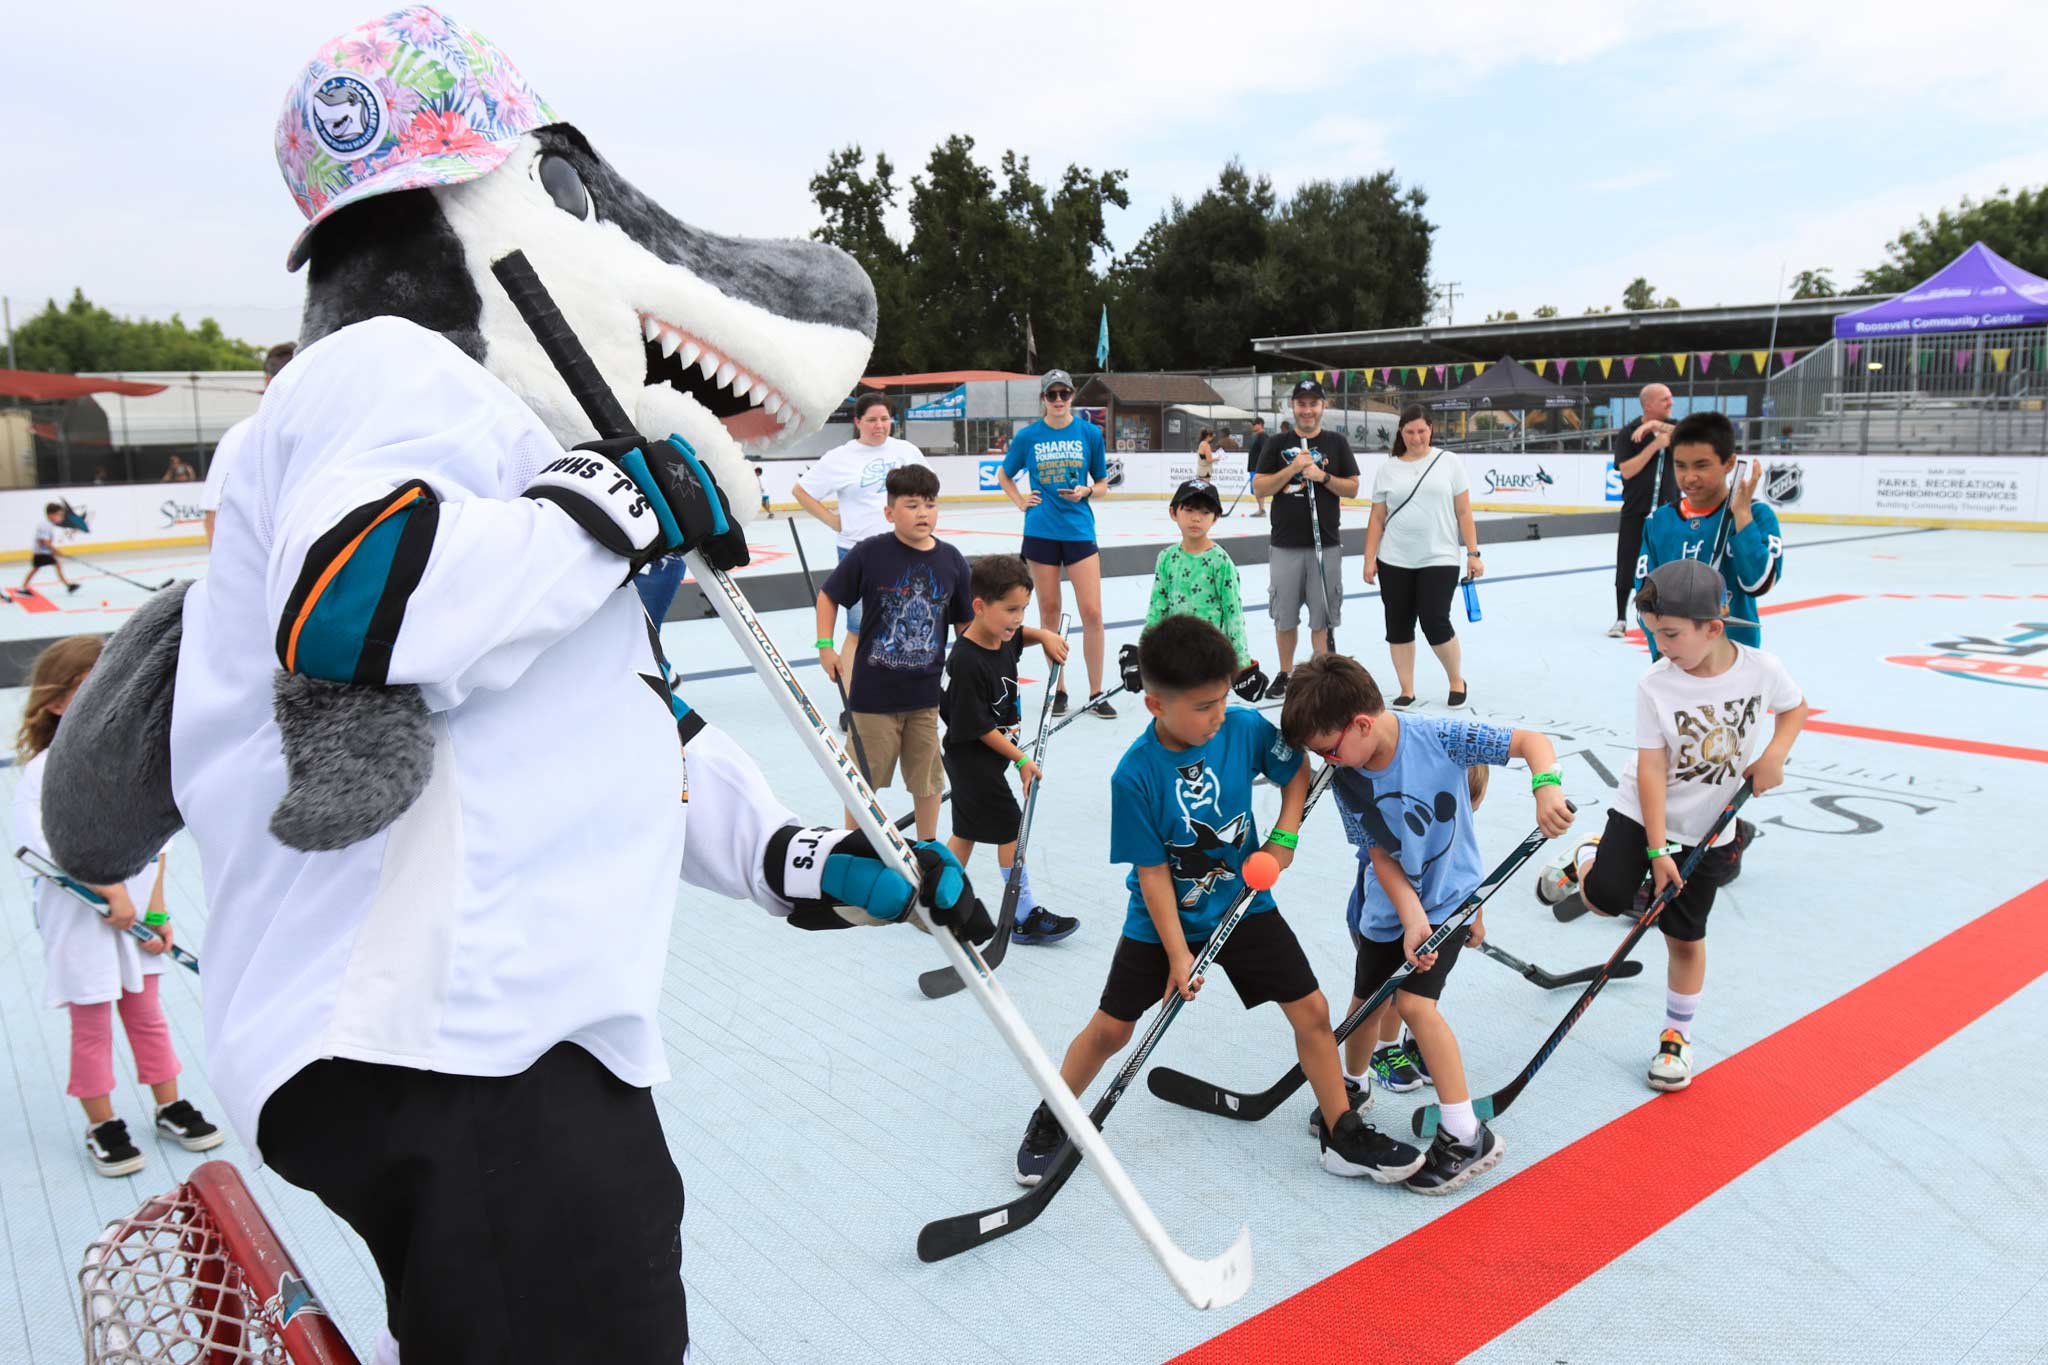 Kids playing street hockey with the Sharks mascot